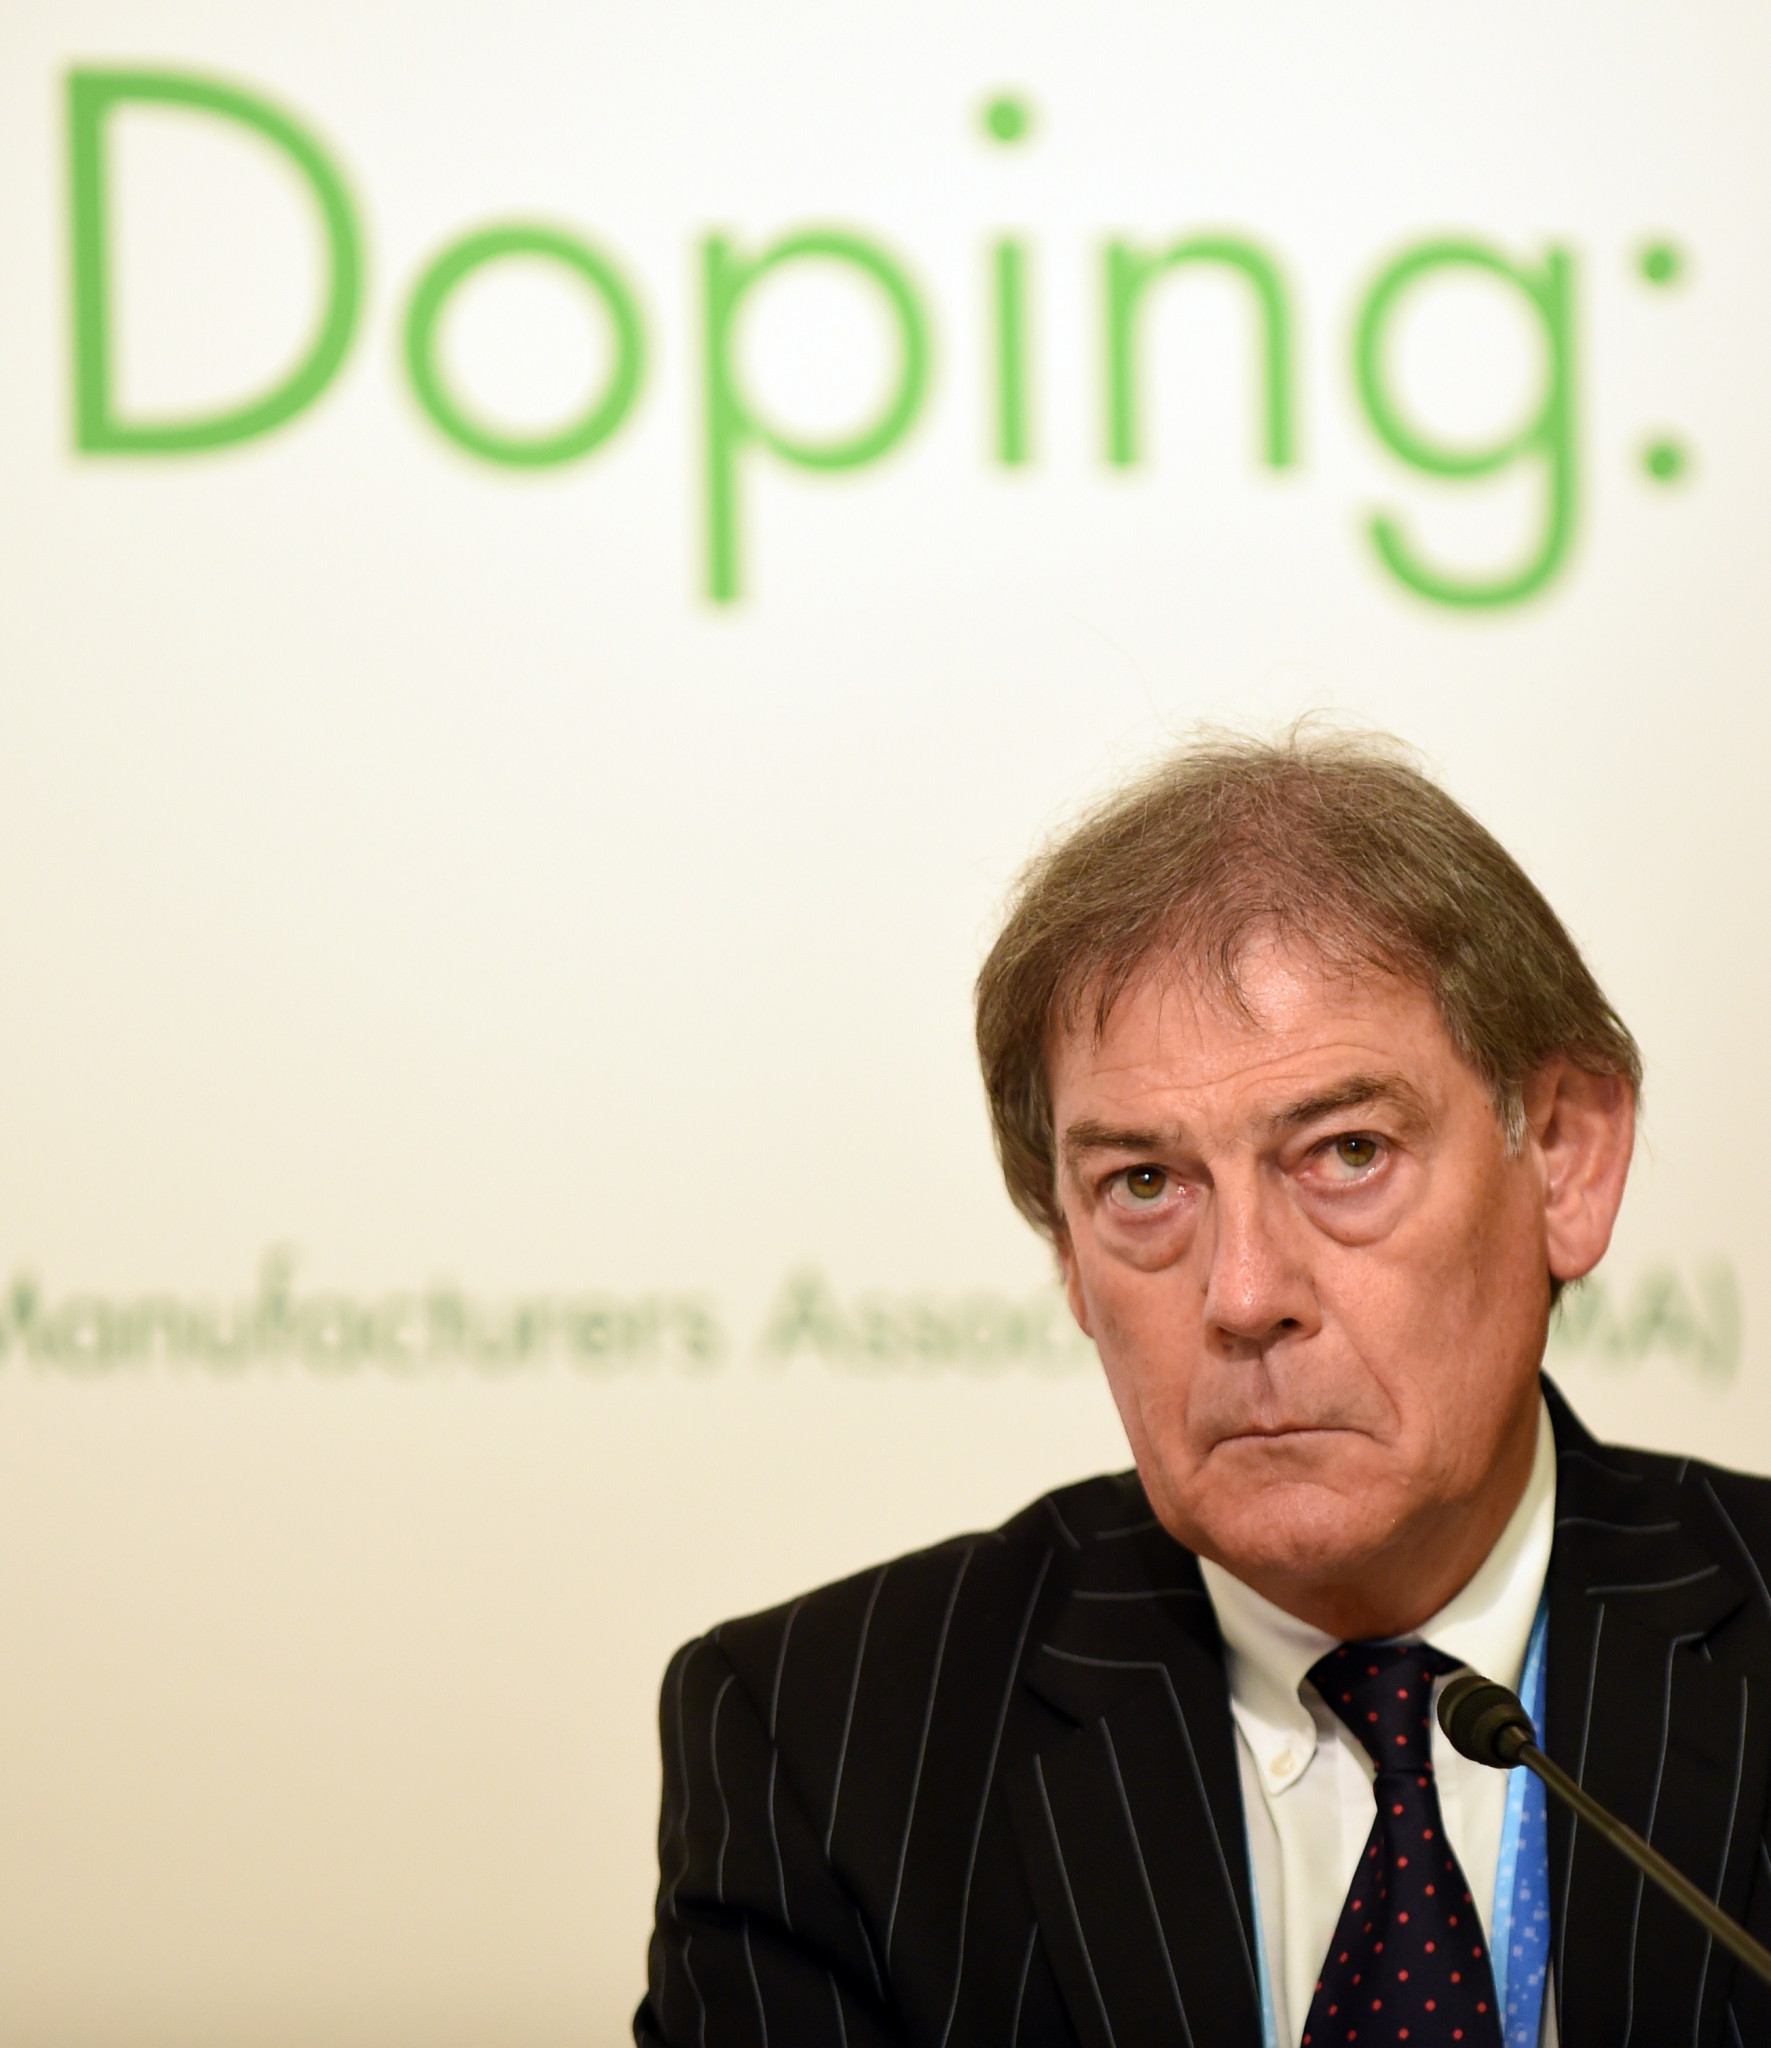 David Howman, chair of the Athletics Integrity Unit and former director general of the World Anti-Doping Agency, is among four appointments to the International Tennis Federation Ethics Commission ©Getty Images